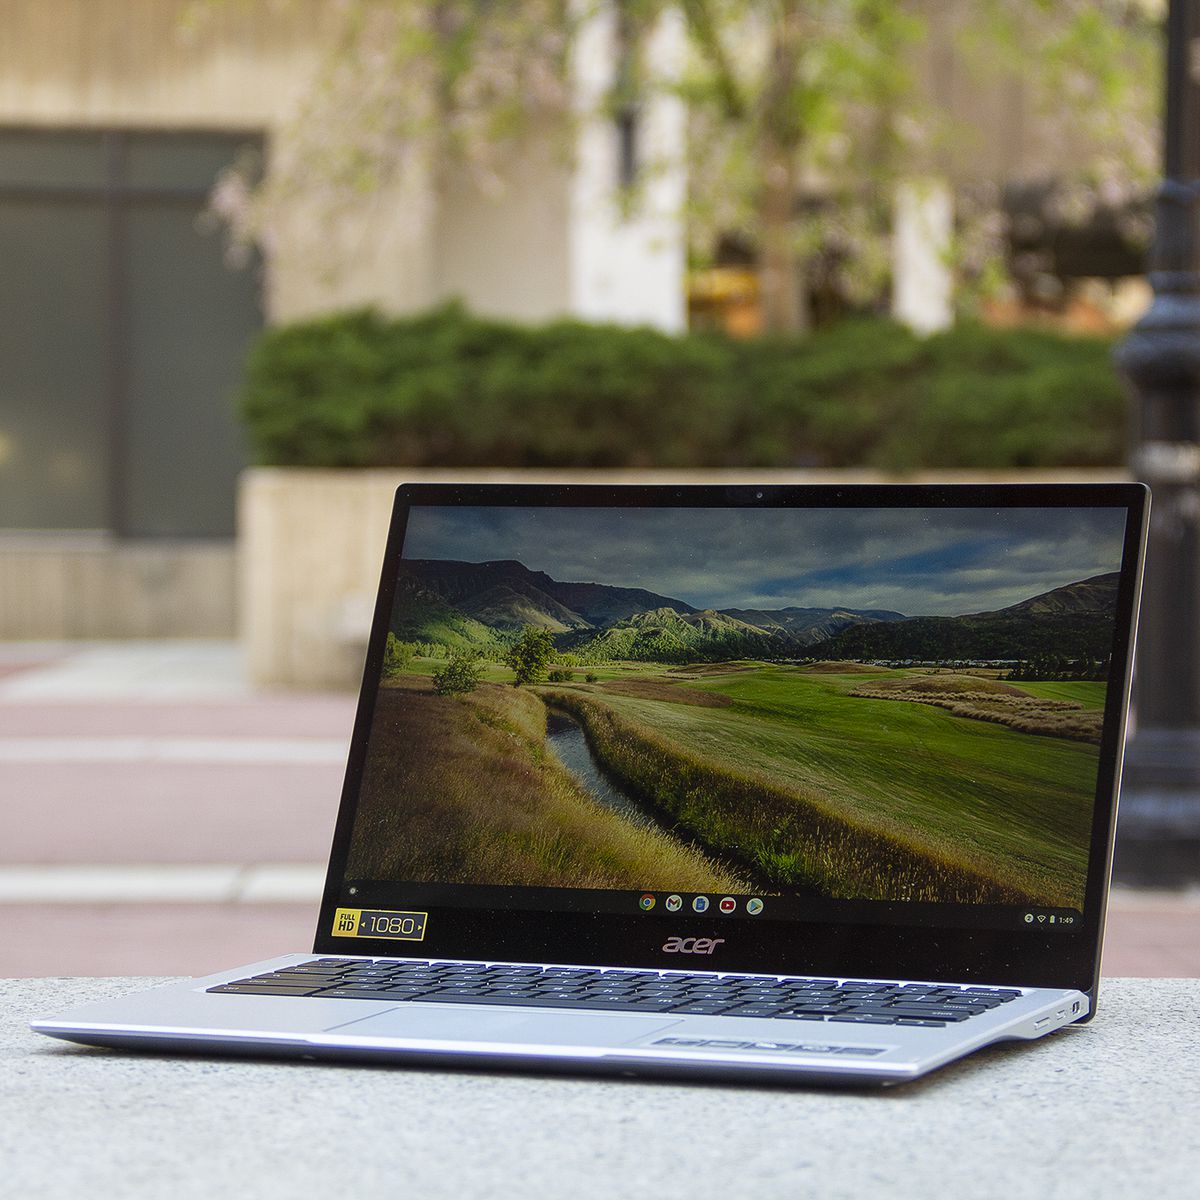 The Acer Chromebook Spin 513 sits at an angle to the left, open on a stone bench.  The screen displays a rustic view.